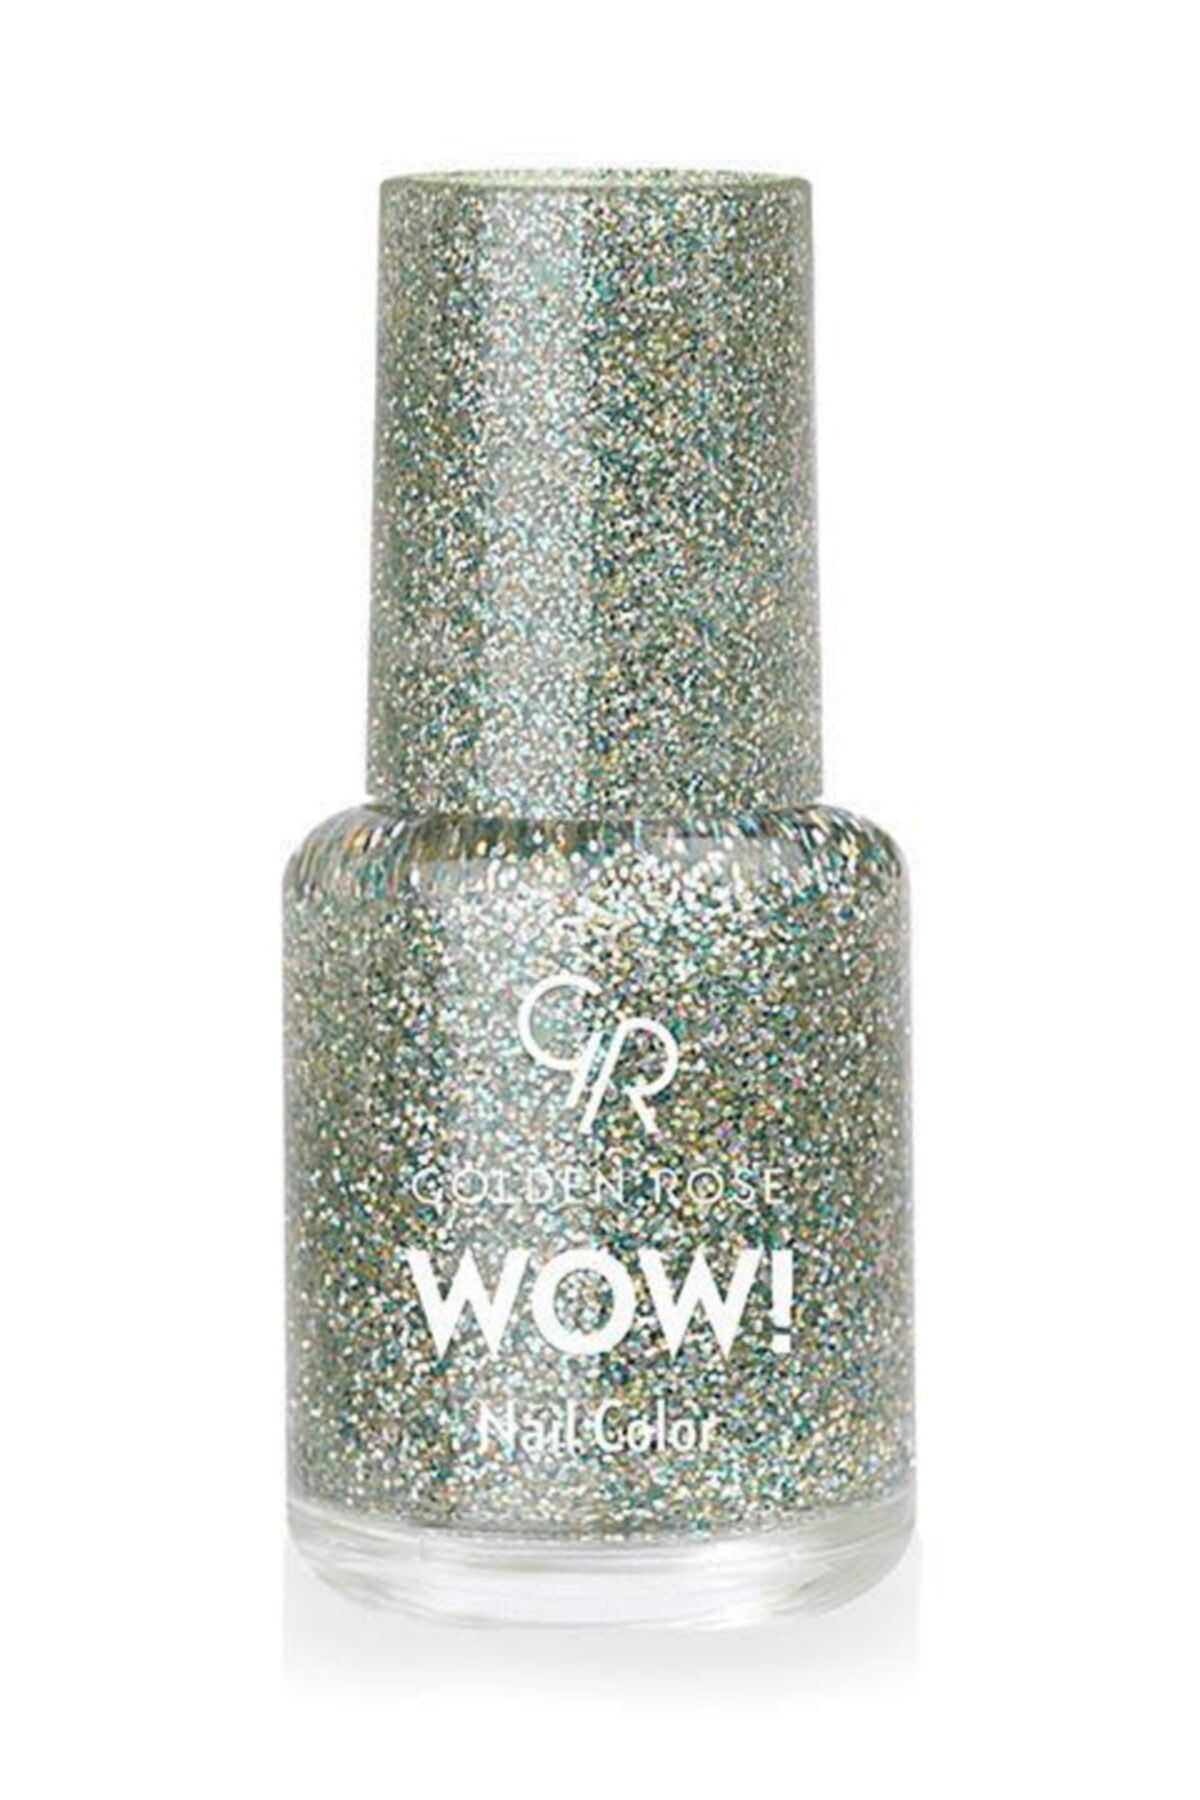 Golden Rose Wow Nail Color Glitter - No 204